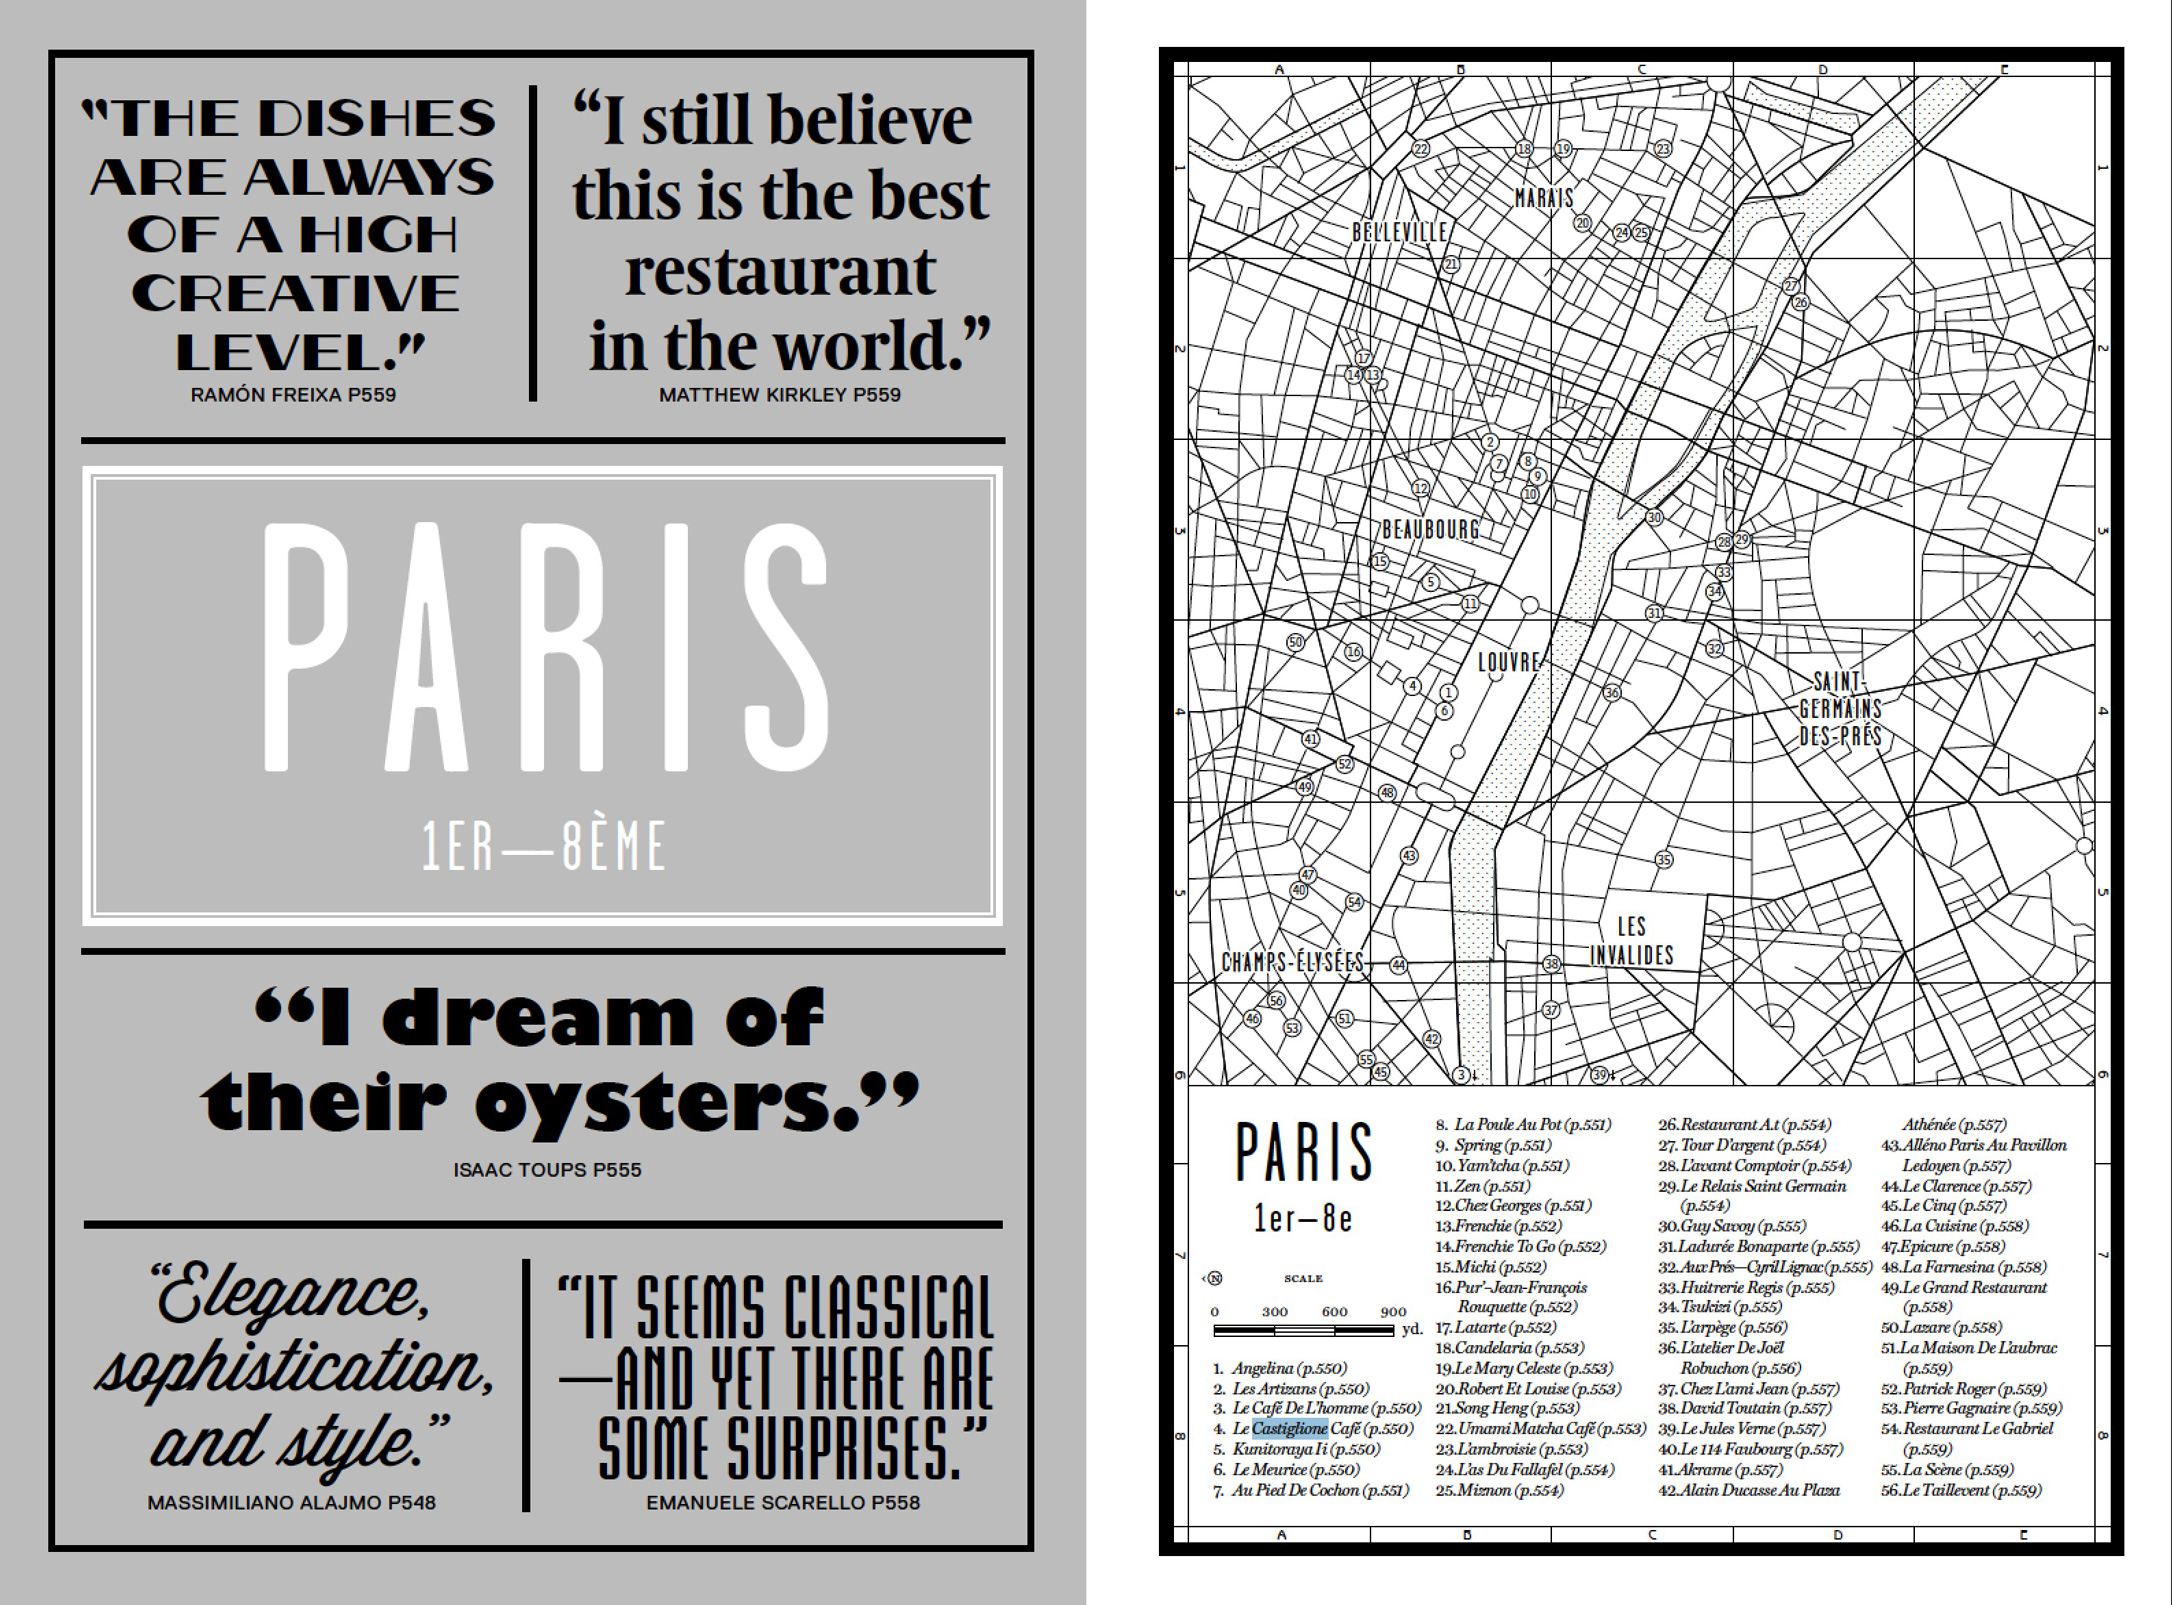 The Paris introduction from our new book Where Chefs Eat